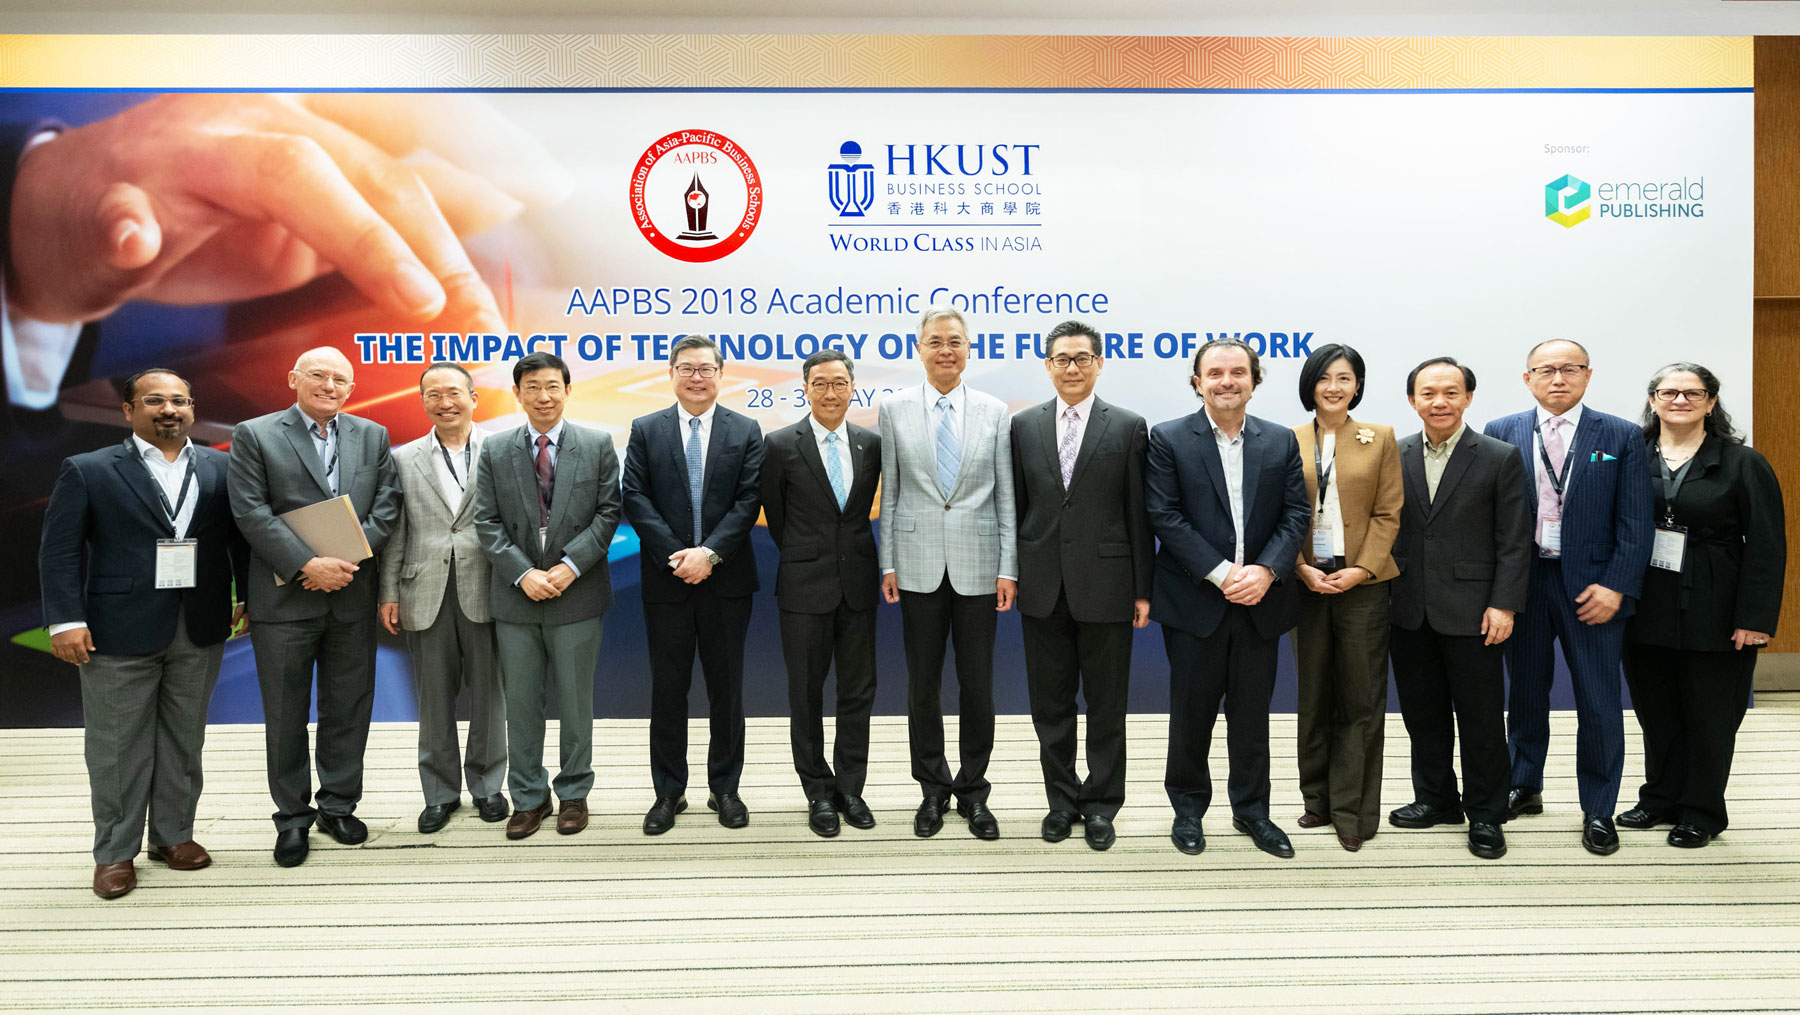 Ir. Allen Yeung, Government Chief Information Officer (6th right), in group photo with Prof Shyy Wei, Acting President, HKUST (7th right), Mr Albert Wong, CEO, Hong Kong Science and Technology Parks Corporation, (6th left), Prof Tam Kar Yan, President of AAPBS and Dean of HKUST Business School (5th left), Prof Eric Cornuel, Director General & CEO, EFMD (5th right), Prof Chen Chialin, Associate Dean of International Affairs & Global MAB, College of Management, National Taiwan University  (4th left), Dr Kang Jikyeong, President and Dean, Asian Institute of Management (4th right), Prof Lee Heeseok, Vice Dean, College of Business, Korea Advanced Institute of Science and Technology (3rd left), Prof Hum Sin Hoon, Deputy Dean, National University of Singapore Business School (3rd right), Prof Ian Fenwick, Interim Deputy Director, Sasin School of Management (Bangkok) (2nd left), Prof Yokoyama Kenji, Vice-President/President Elect of AAPBS, and Vice-President & Executive Dean, Ritsumeikan Asia Pacific University (2nd right),  Prof Anirban Mukhopadhyay, Associate Dean, HKUST Business School (leftmost) and  Prof Véronique J. A. Lafon-Vinais, Executive Director (Career Development & Corporate Outreach), HKUST Business School (rightmost).